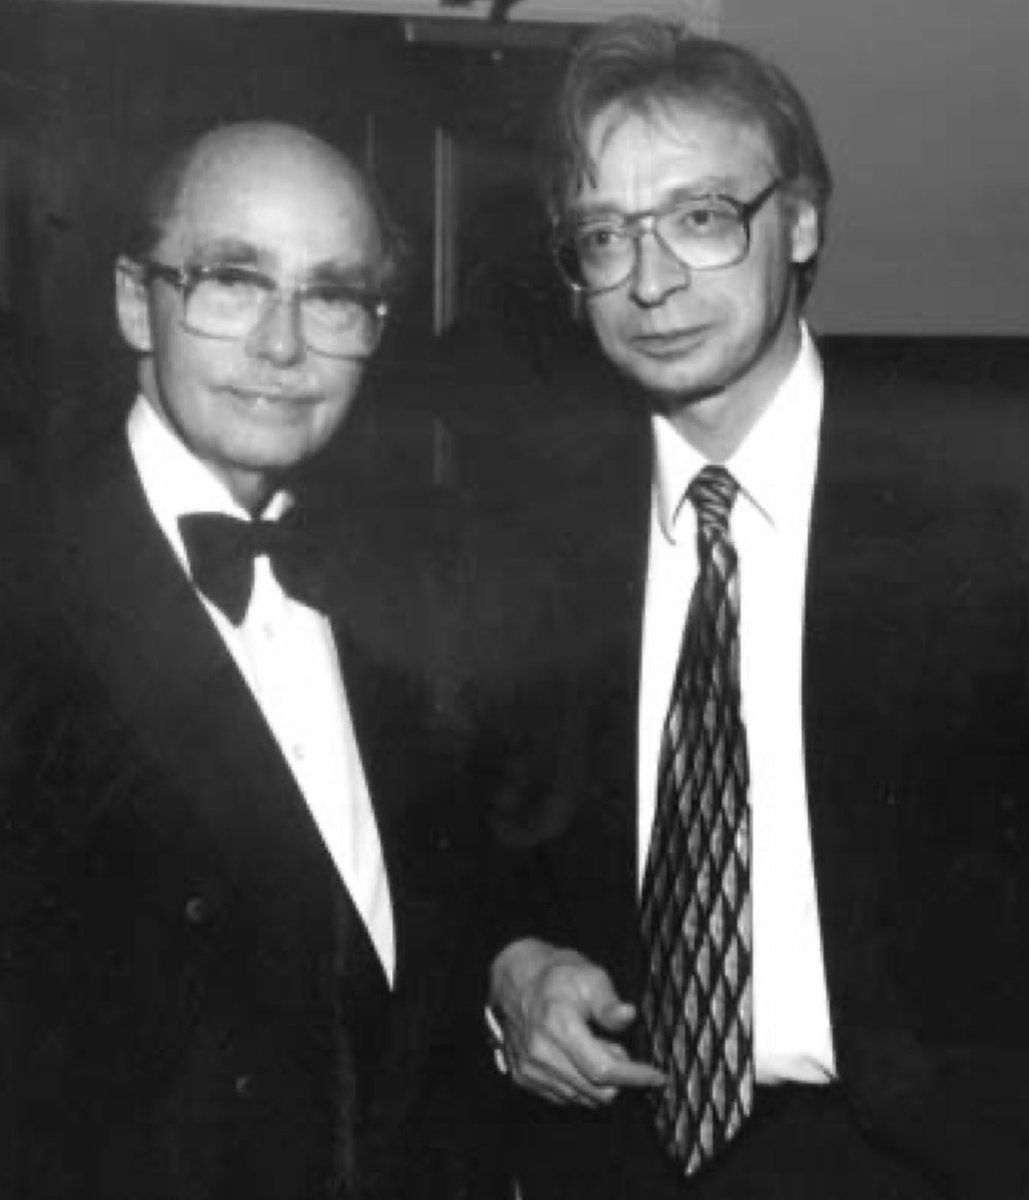 Otto von Habsburg, crown prince and son of the last emperor of Austria-Hungary, with Hans-Hermann Hoppe

Photo take at the 1999 Mises Institute Supporter’s Summit